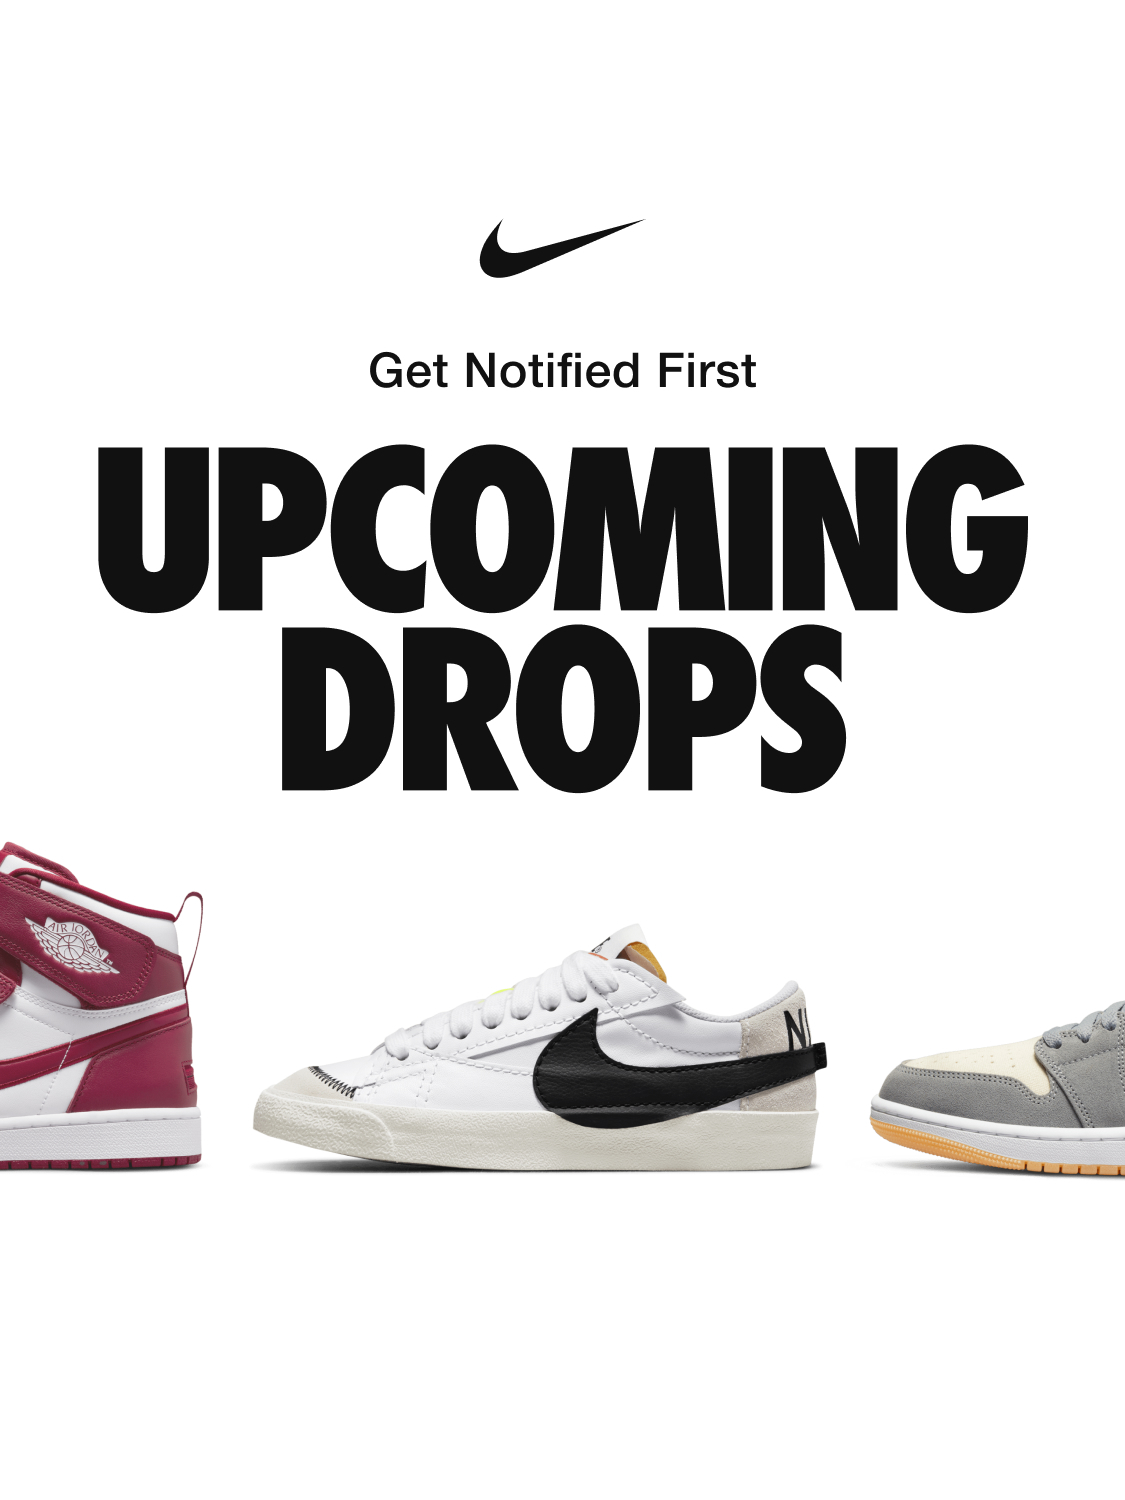 Nike.com on Twitter: "Upcoming Drops. Featuring Jumbo change on a classic design. Check what's dropping soon. 🇺🇸 https://t.co/VcQsemWgFN https://t.co/GeAcbcUWNv" /